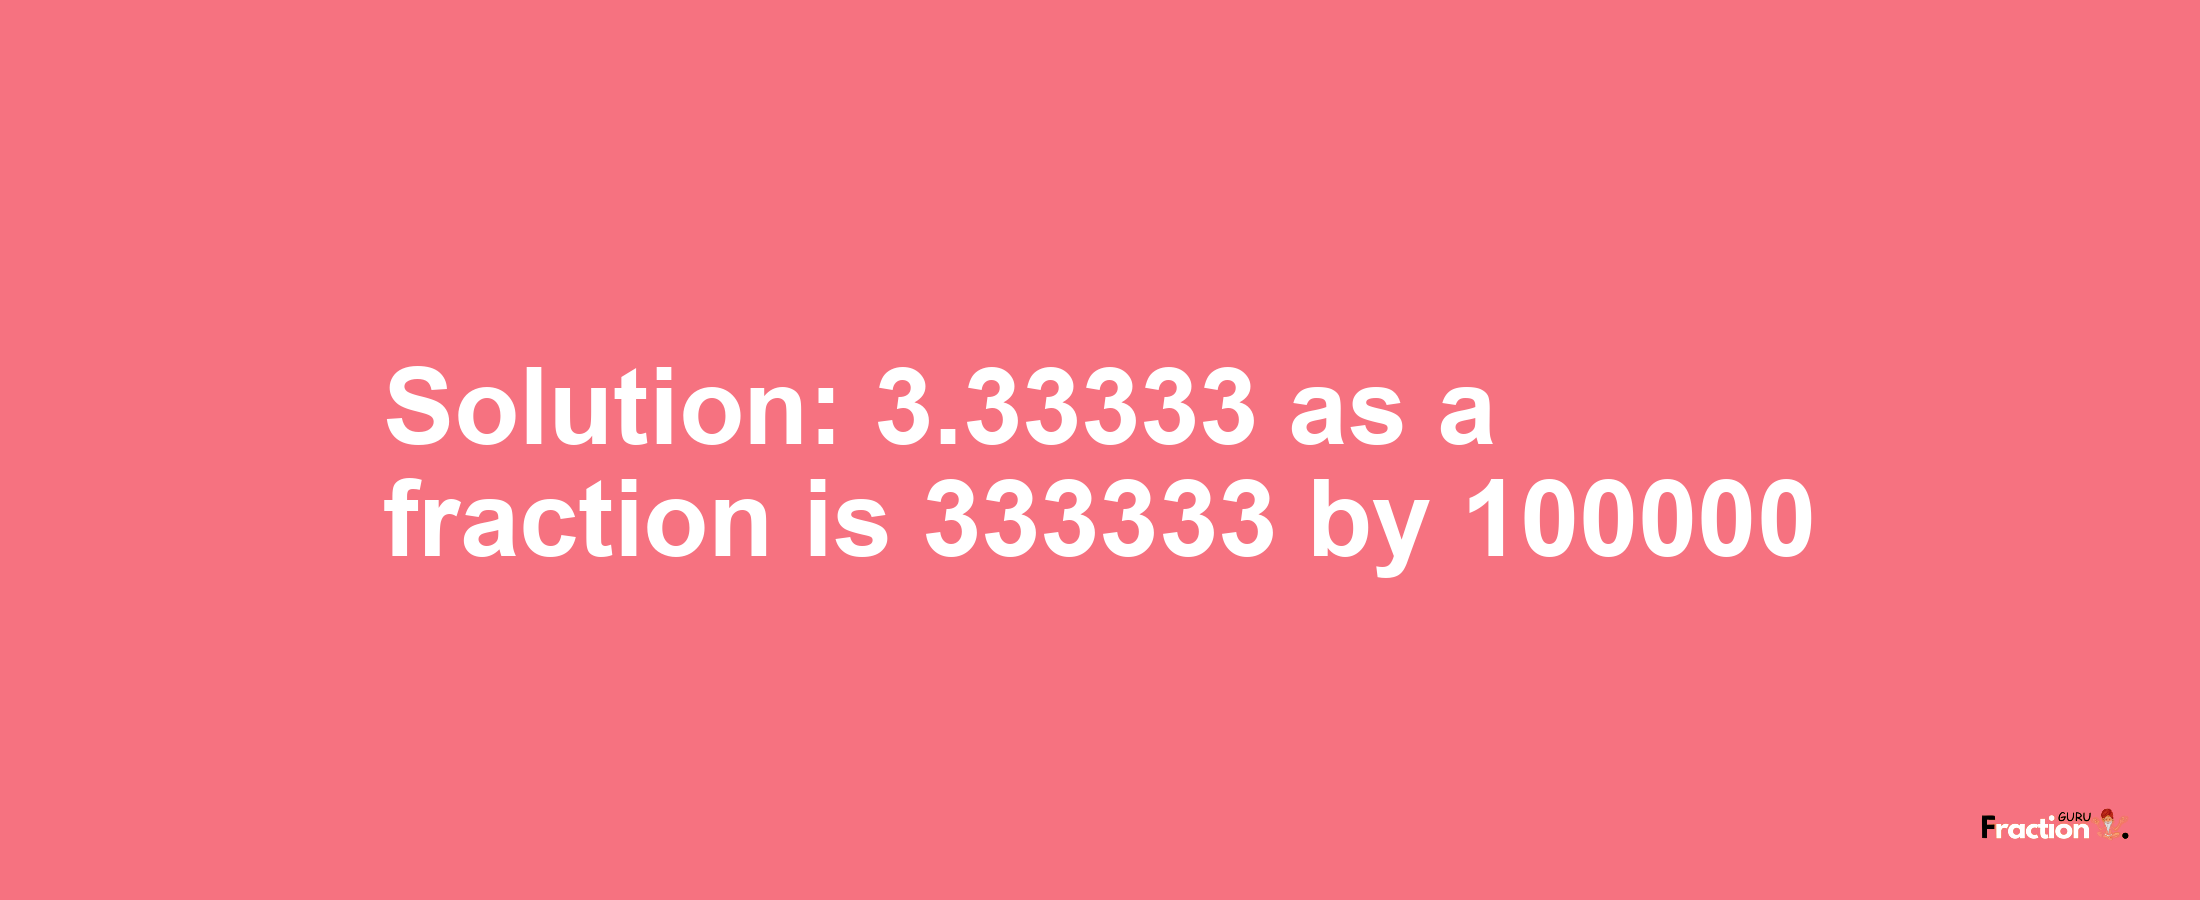 Solution:3.33333 as a fraction is 333333/100000